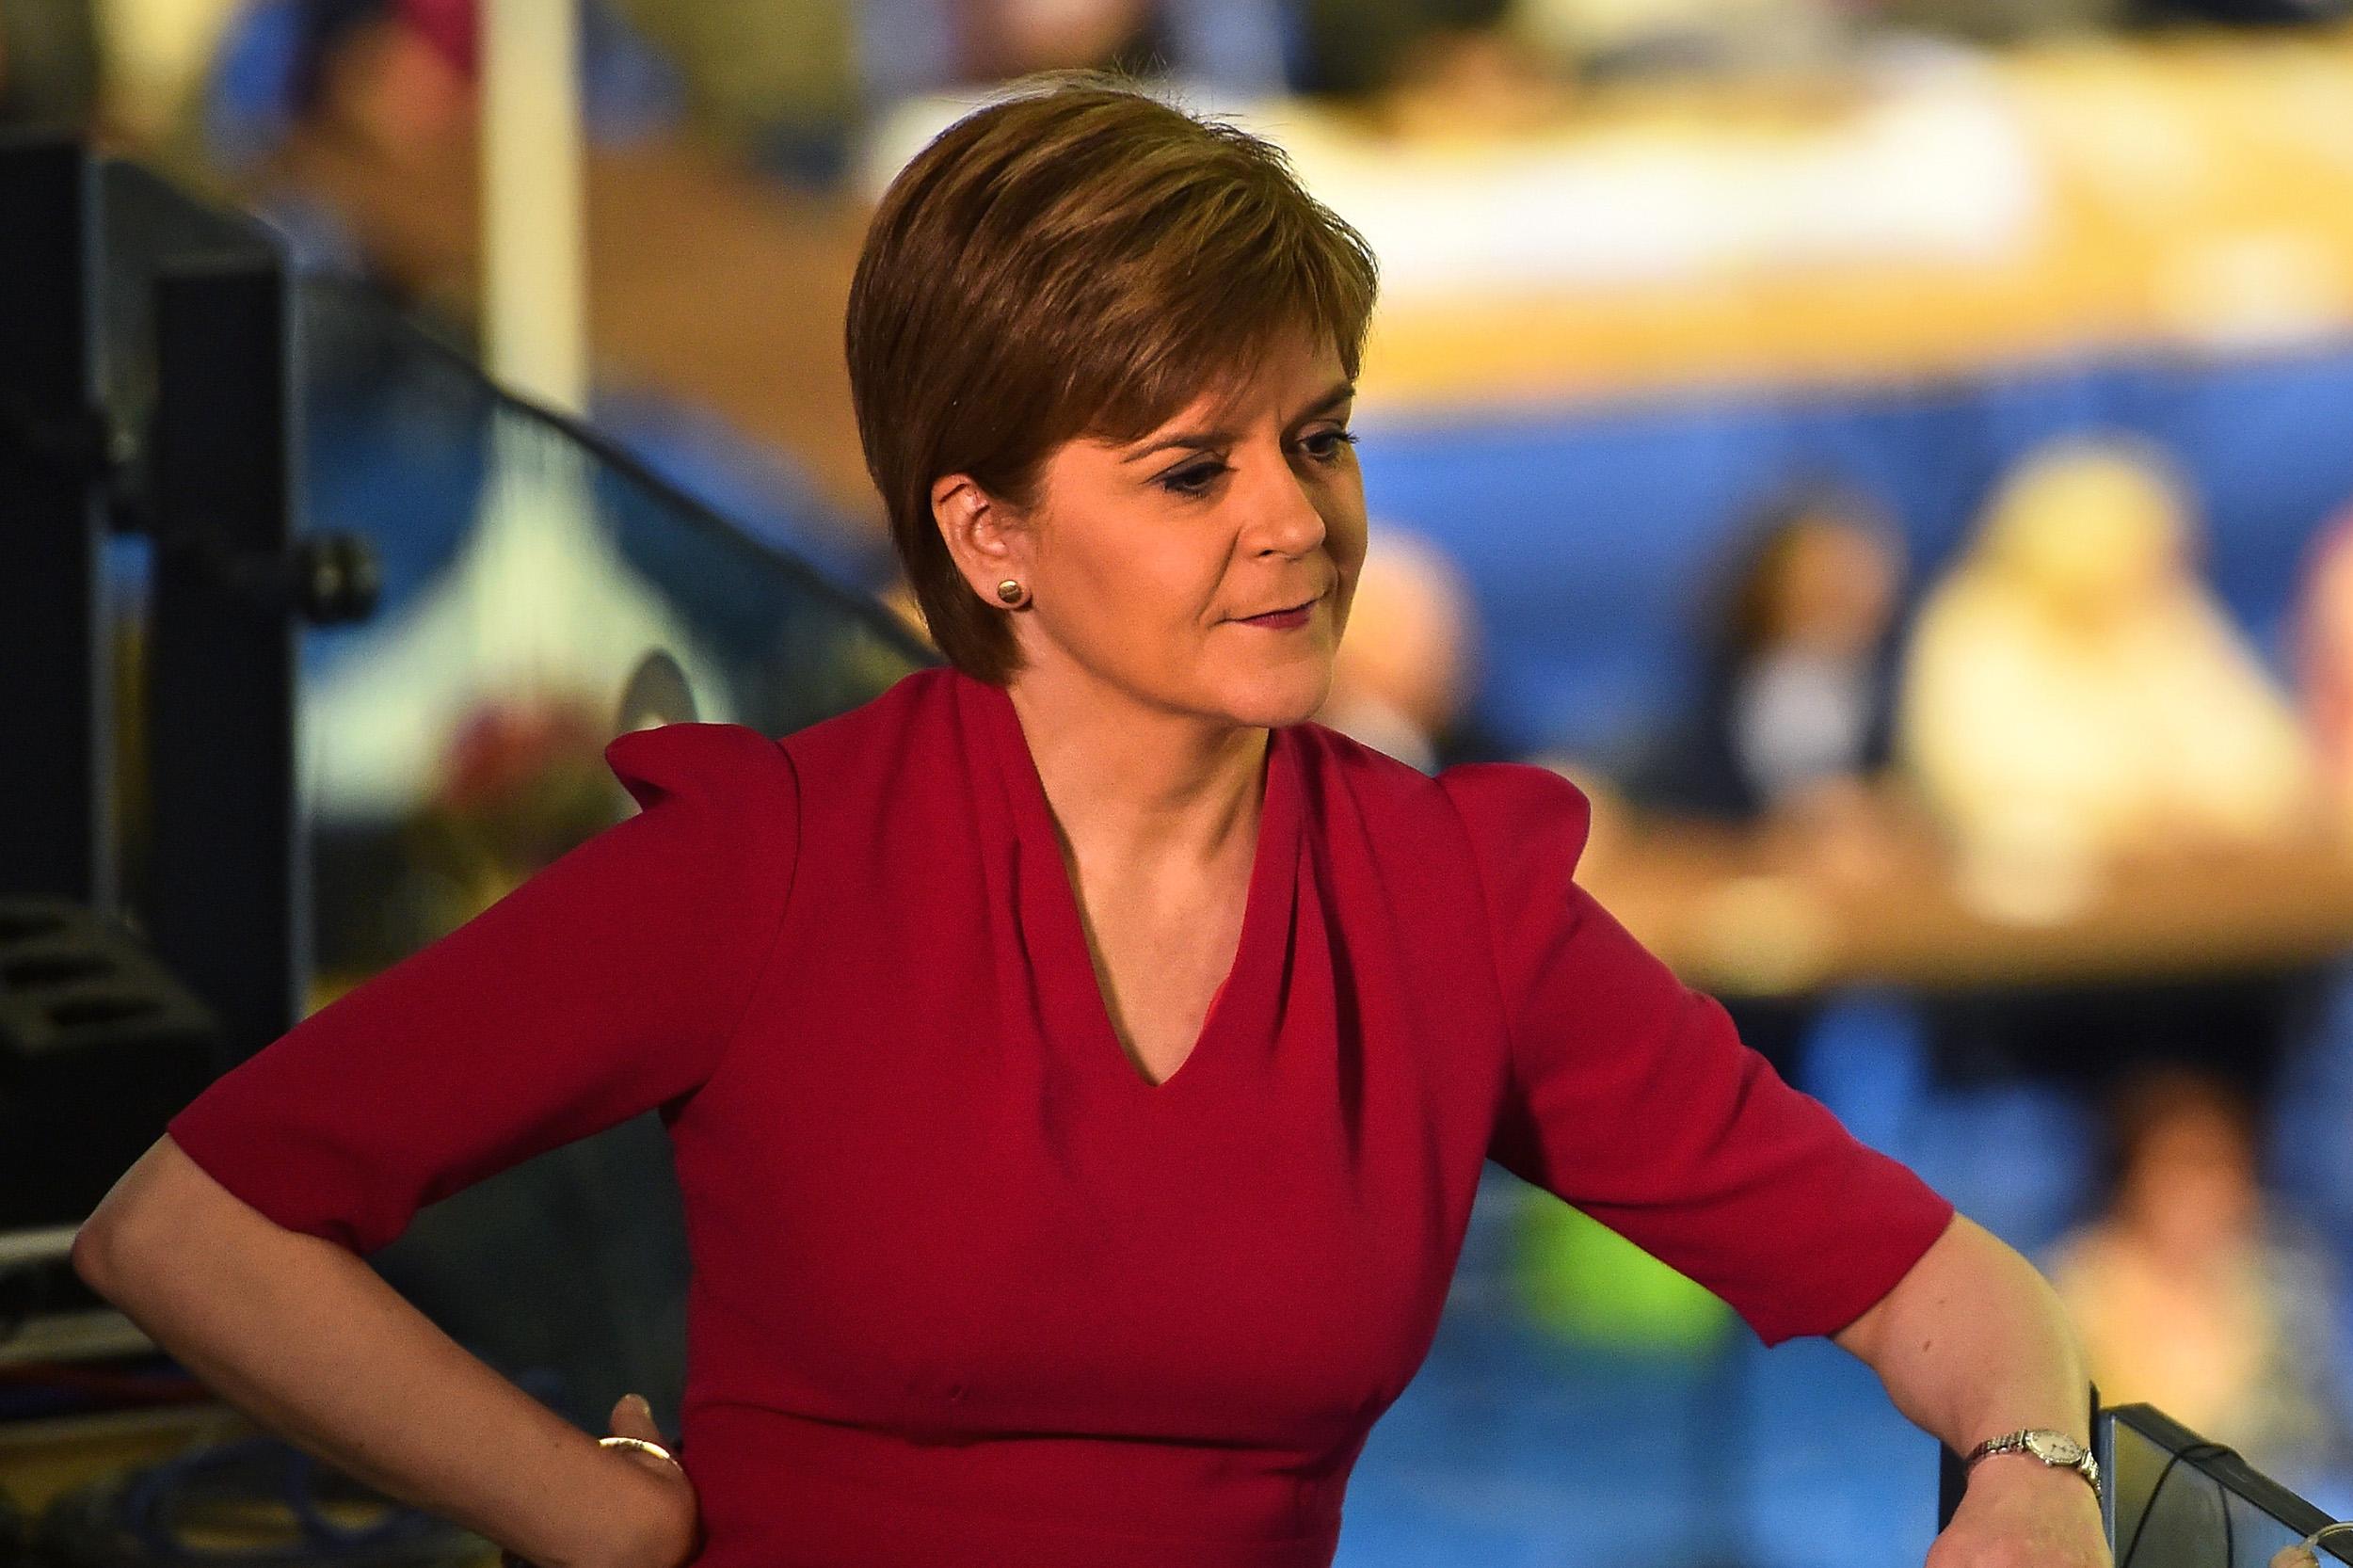 Nicola Sturgeon brands Daily Mail story a 'blatant untruth'